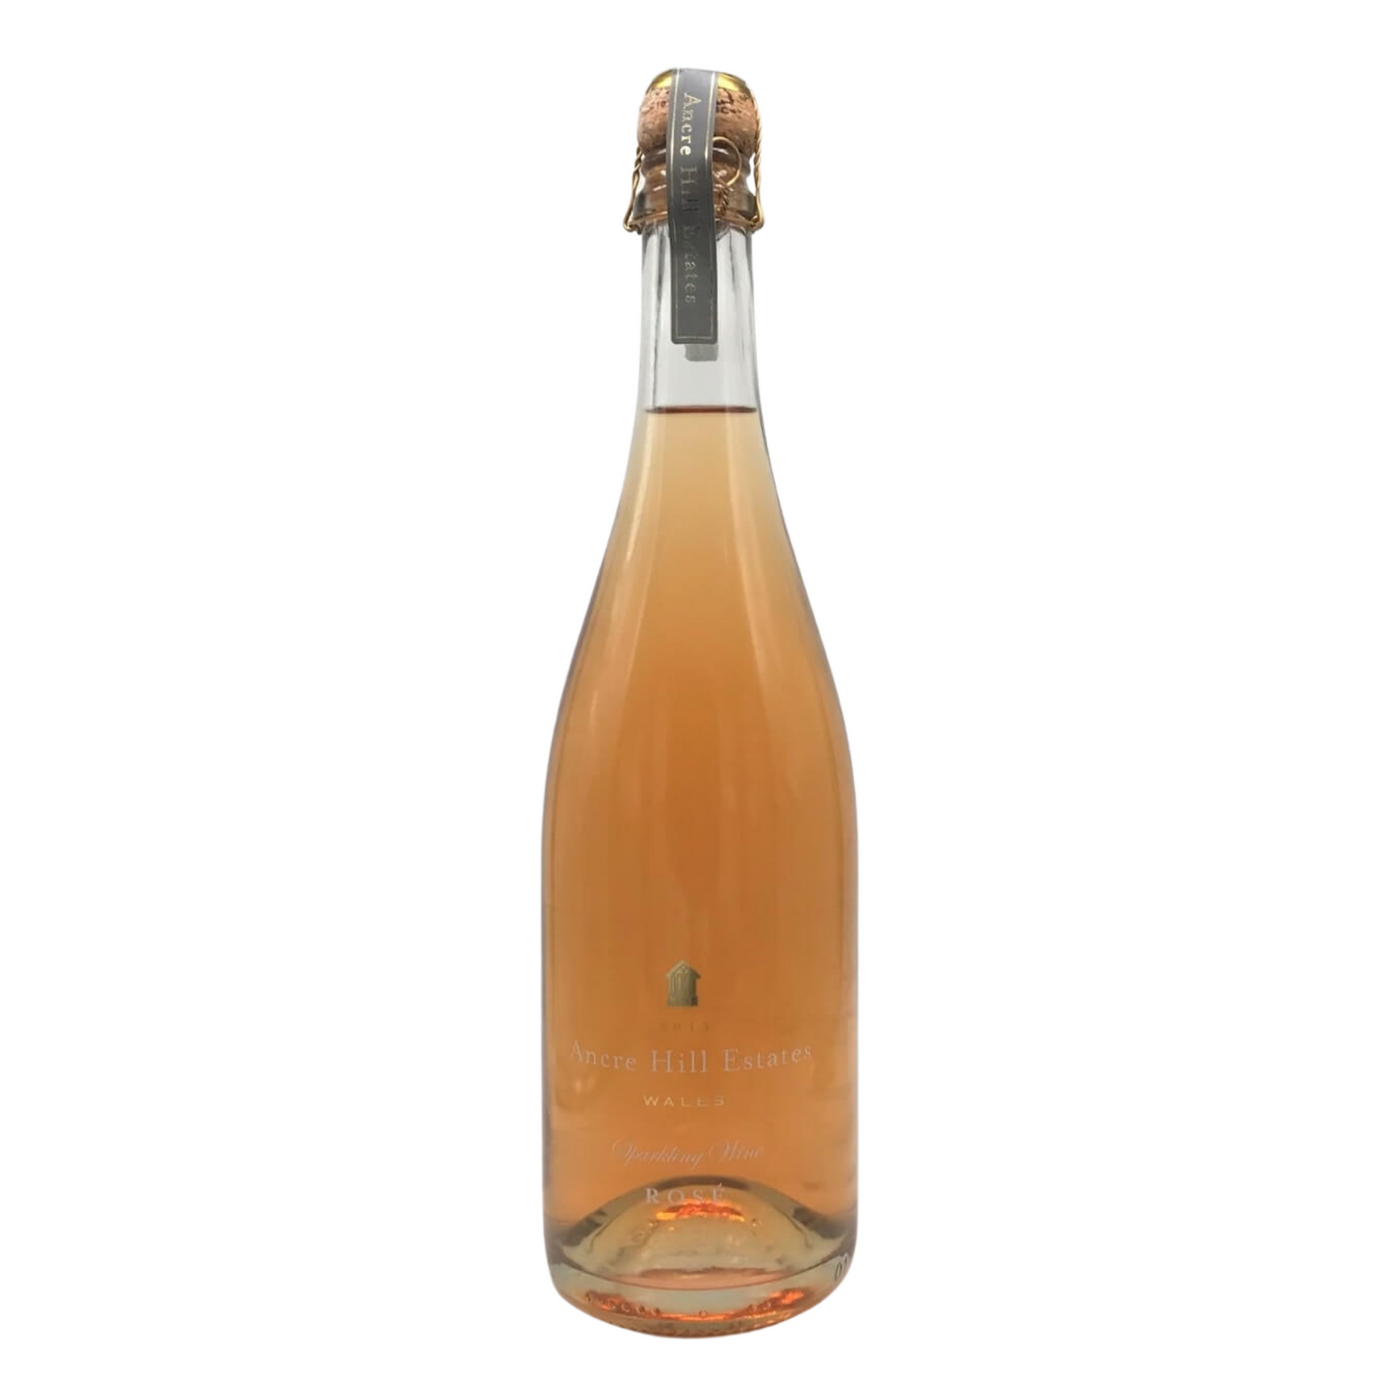 Ancre Hill Sparkling Rose 2013